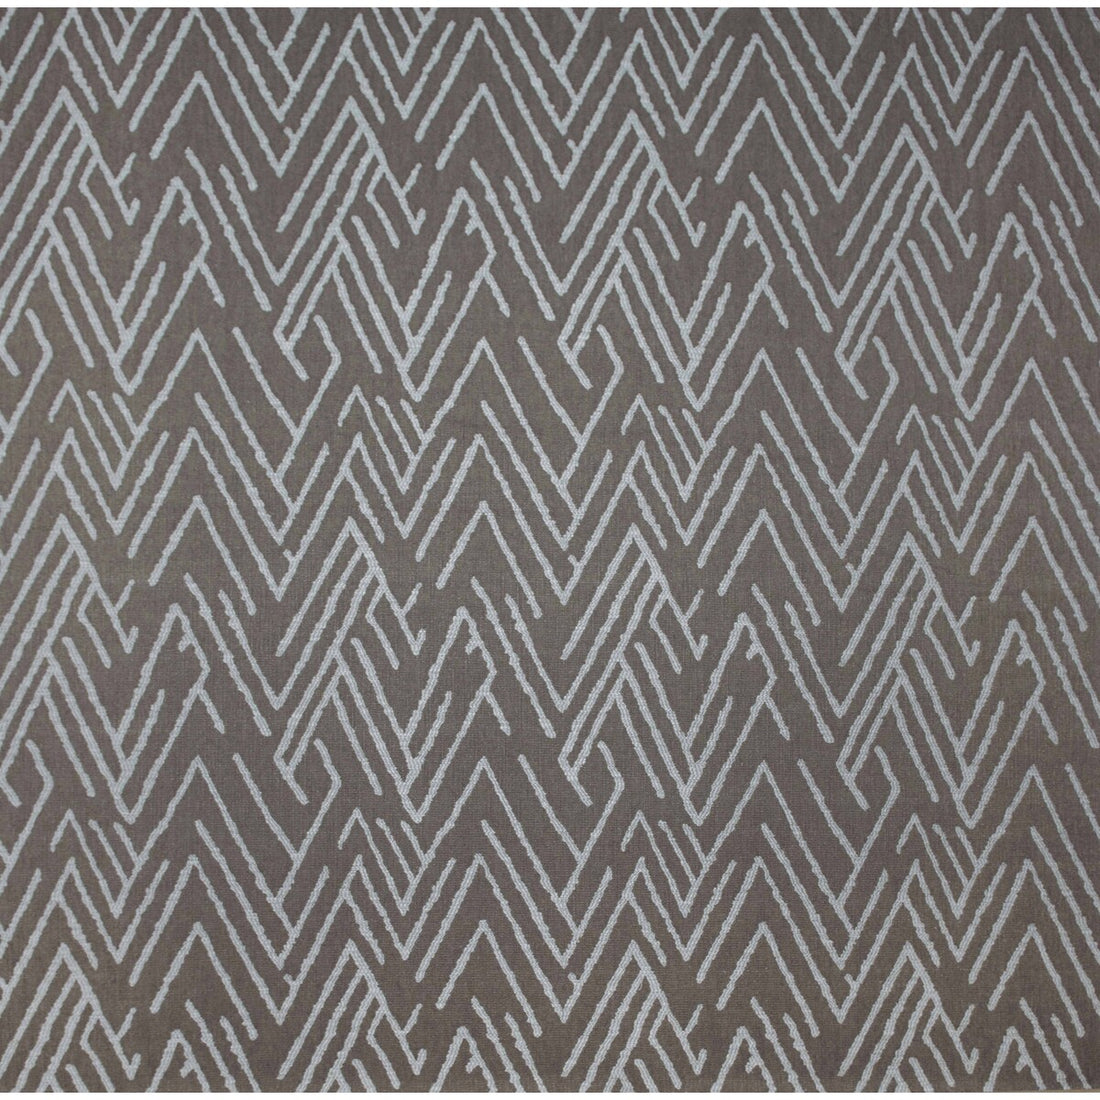 Burundi fabric in marron color - pattern GDT5375.1.0 - by Gaston y Daniela in the Gaston Africalia collection